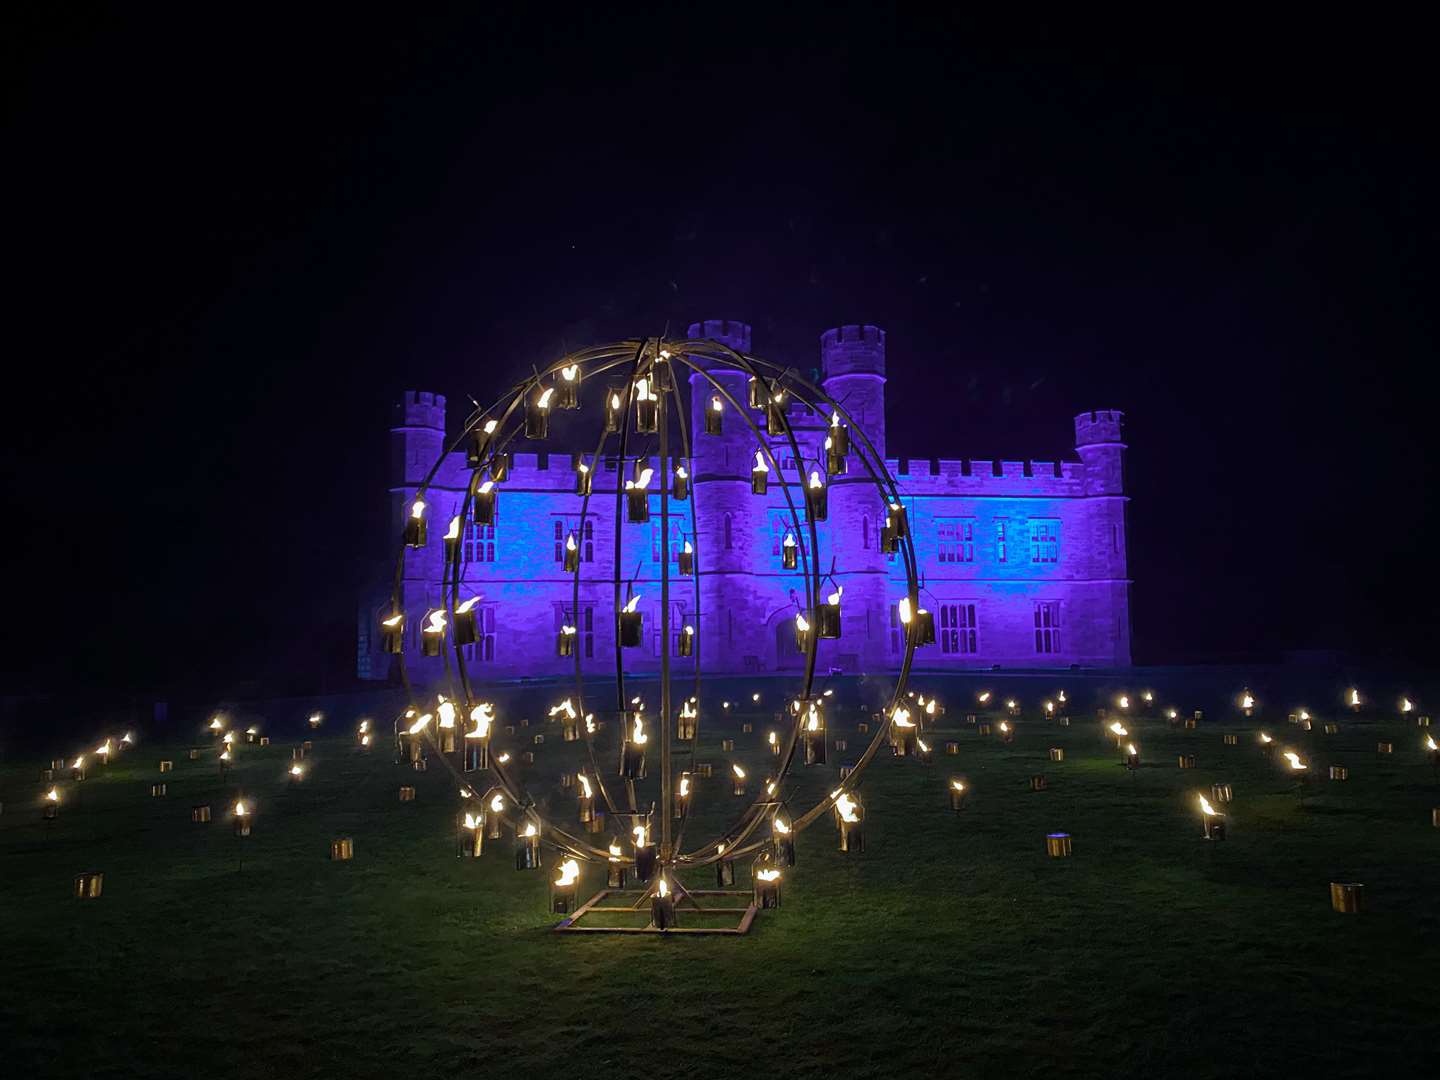 My favourite part of the trail was the mesmerising fire garden inside the castle walls